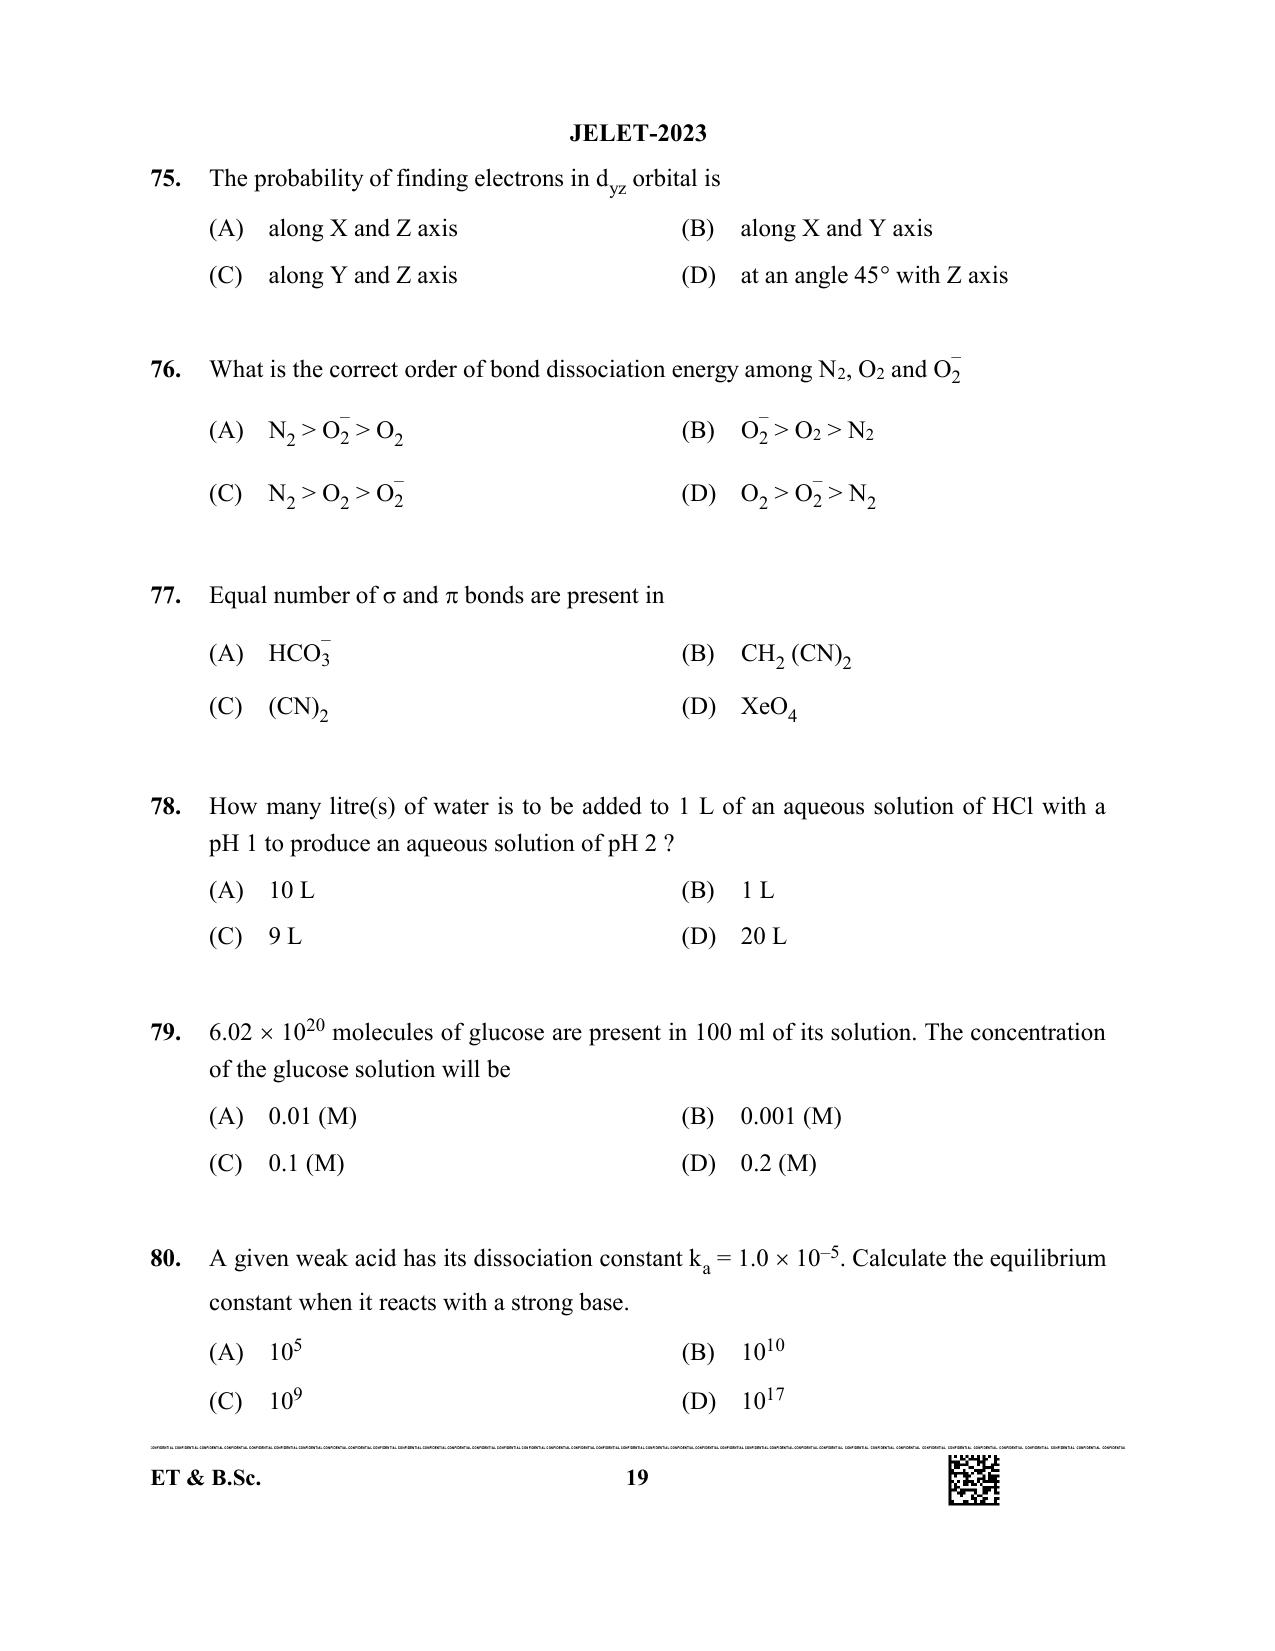 WBJEE JELET 2023 Paper I (ET & BSC) Question Papers - Page 19